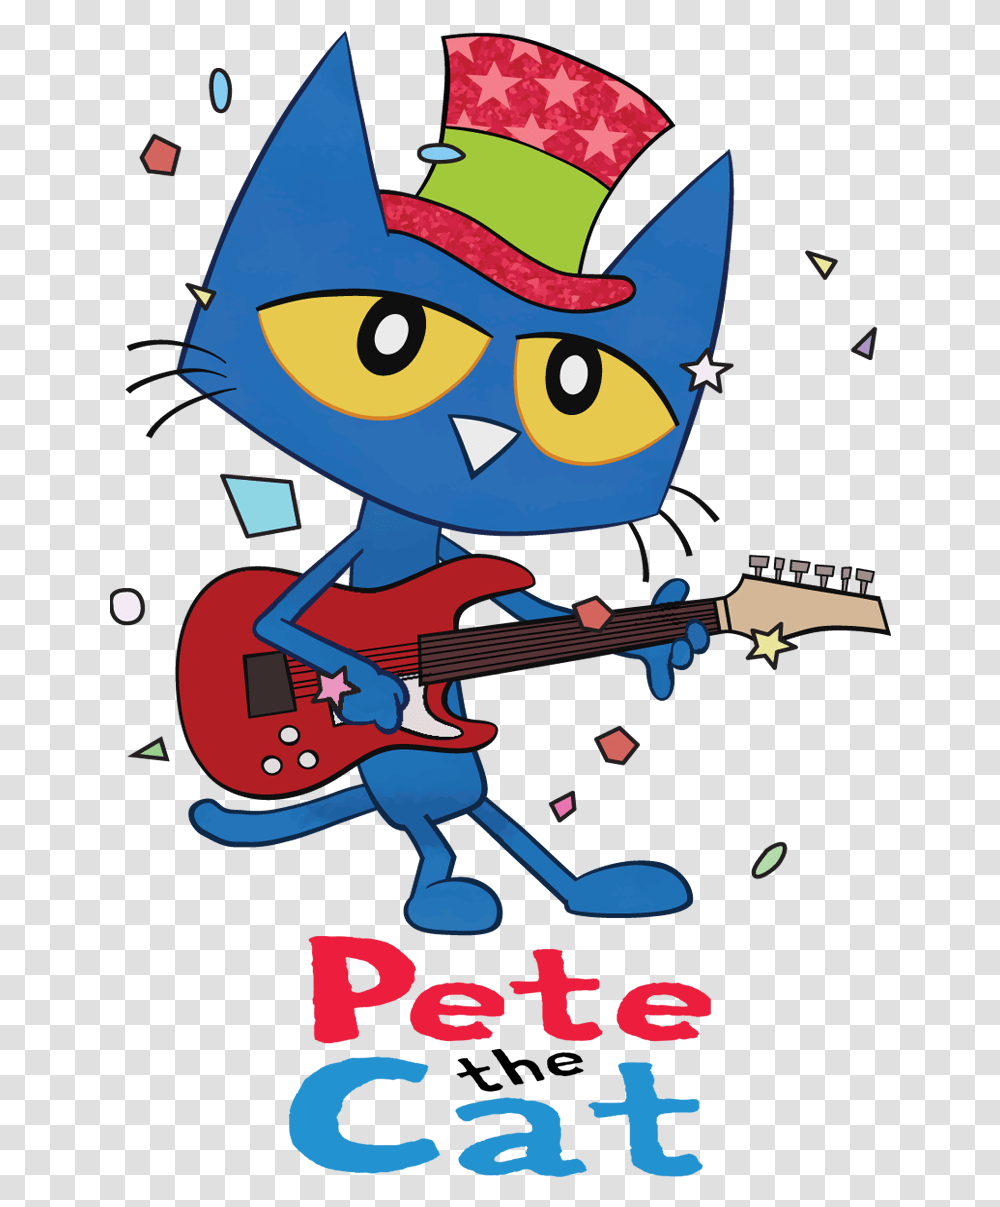 Pete The Cat Pete The Cat Amazon Prime Show, Guitar, Leisure Activities, Musical Instrument, Angry Birds Transparent Png